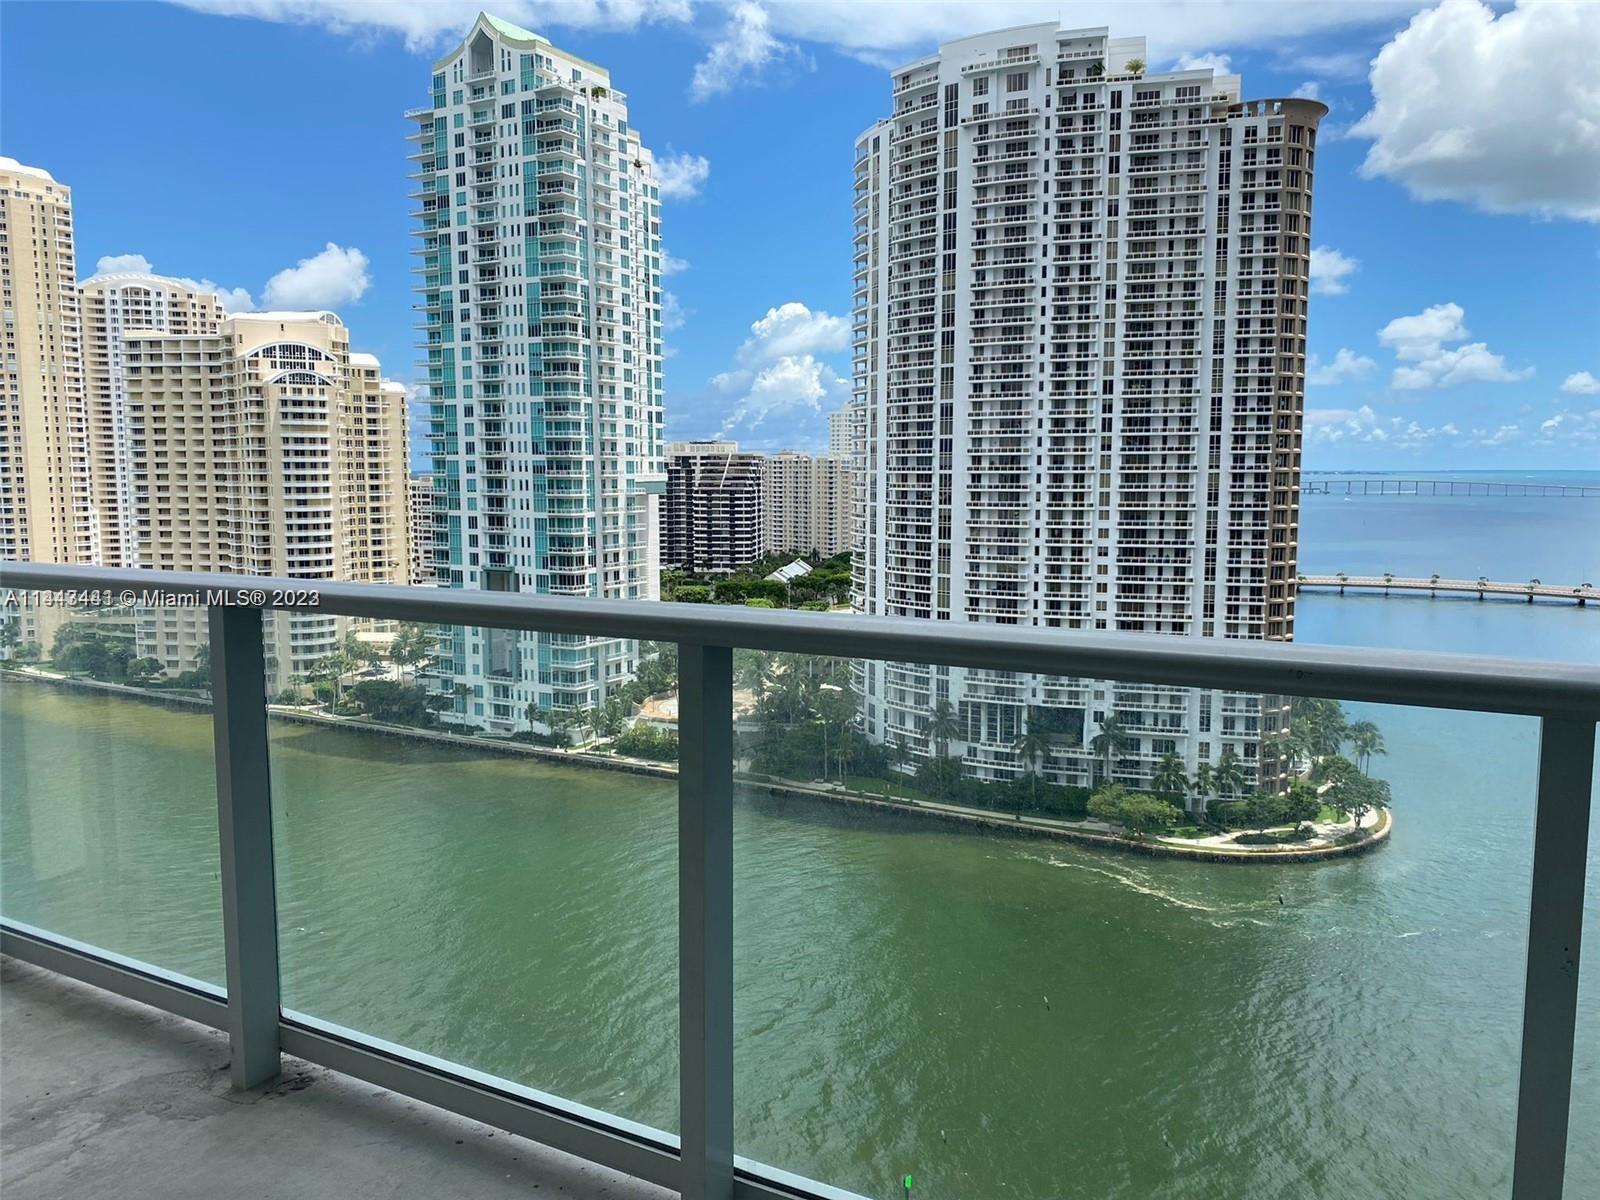 2 bed2 bath with amazing bay view. Floor-to-ceiling sliding glass door, hurricane-impact windows/doors, European-style kitchen with stainless-steel appliances, granite countertops and breakfast bars, spacious bedrooms with walk-in closets and private terraces with gorgeous water and city views.